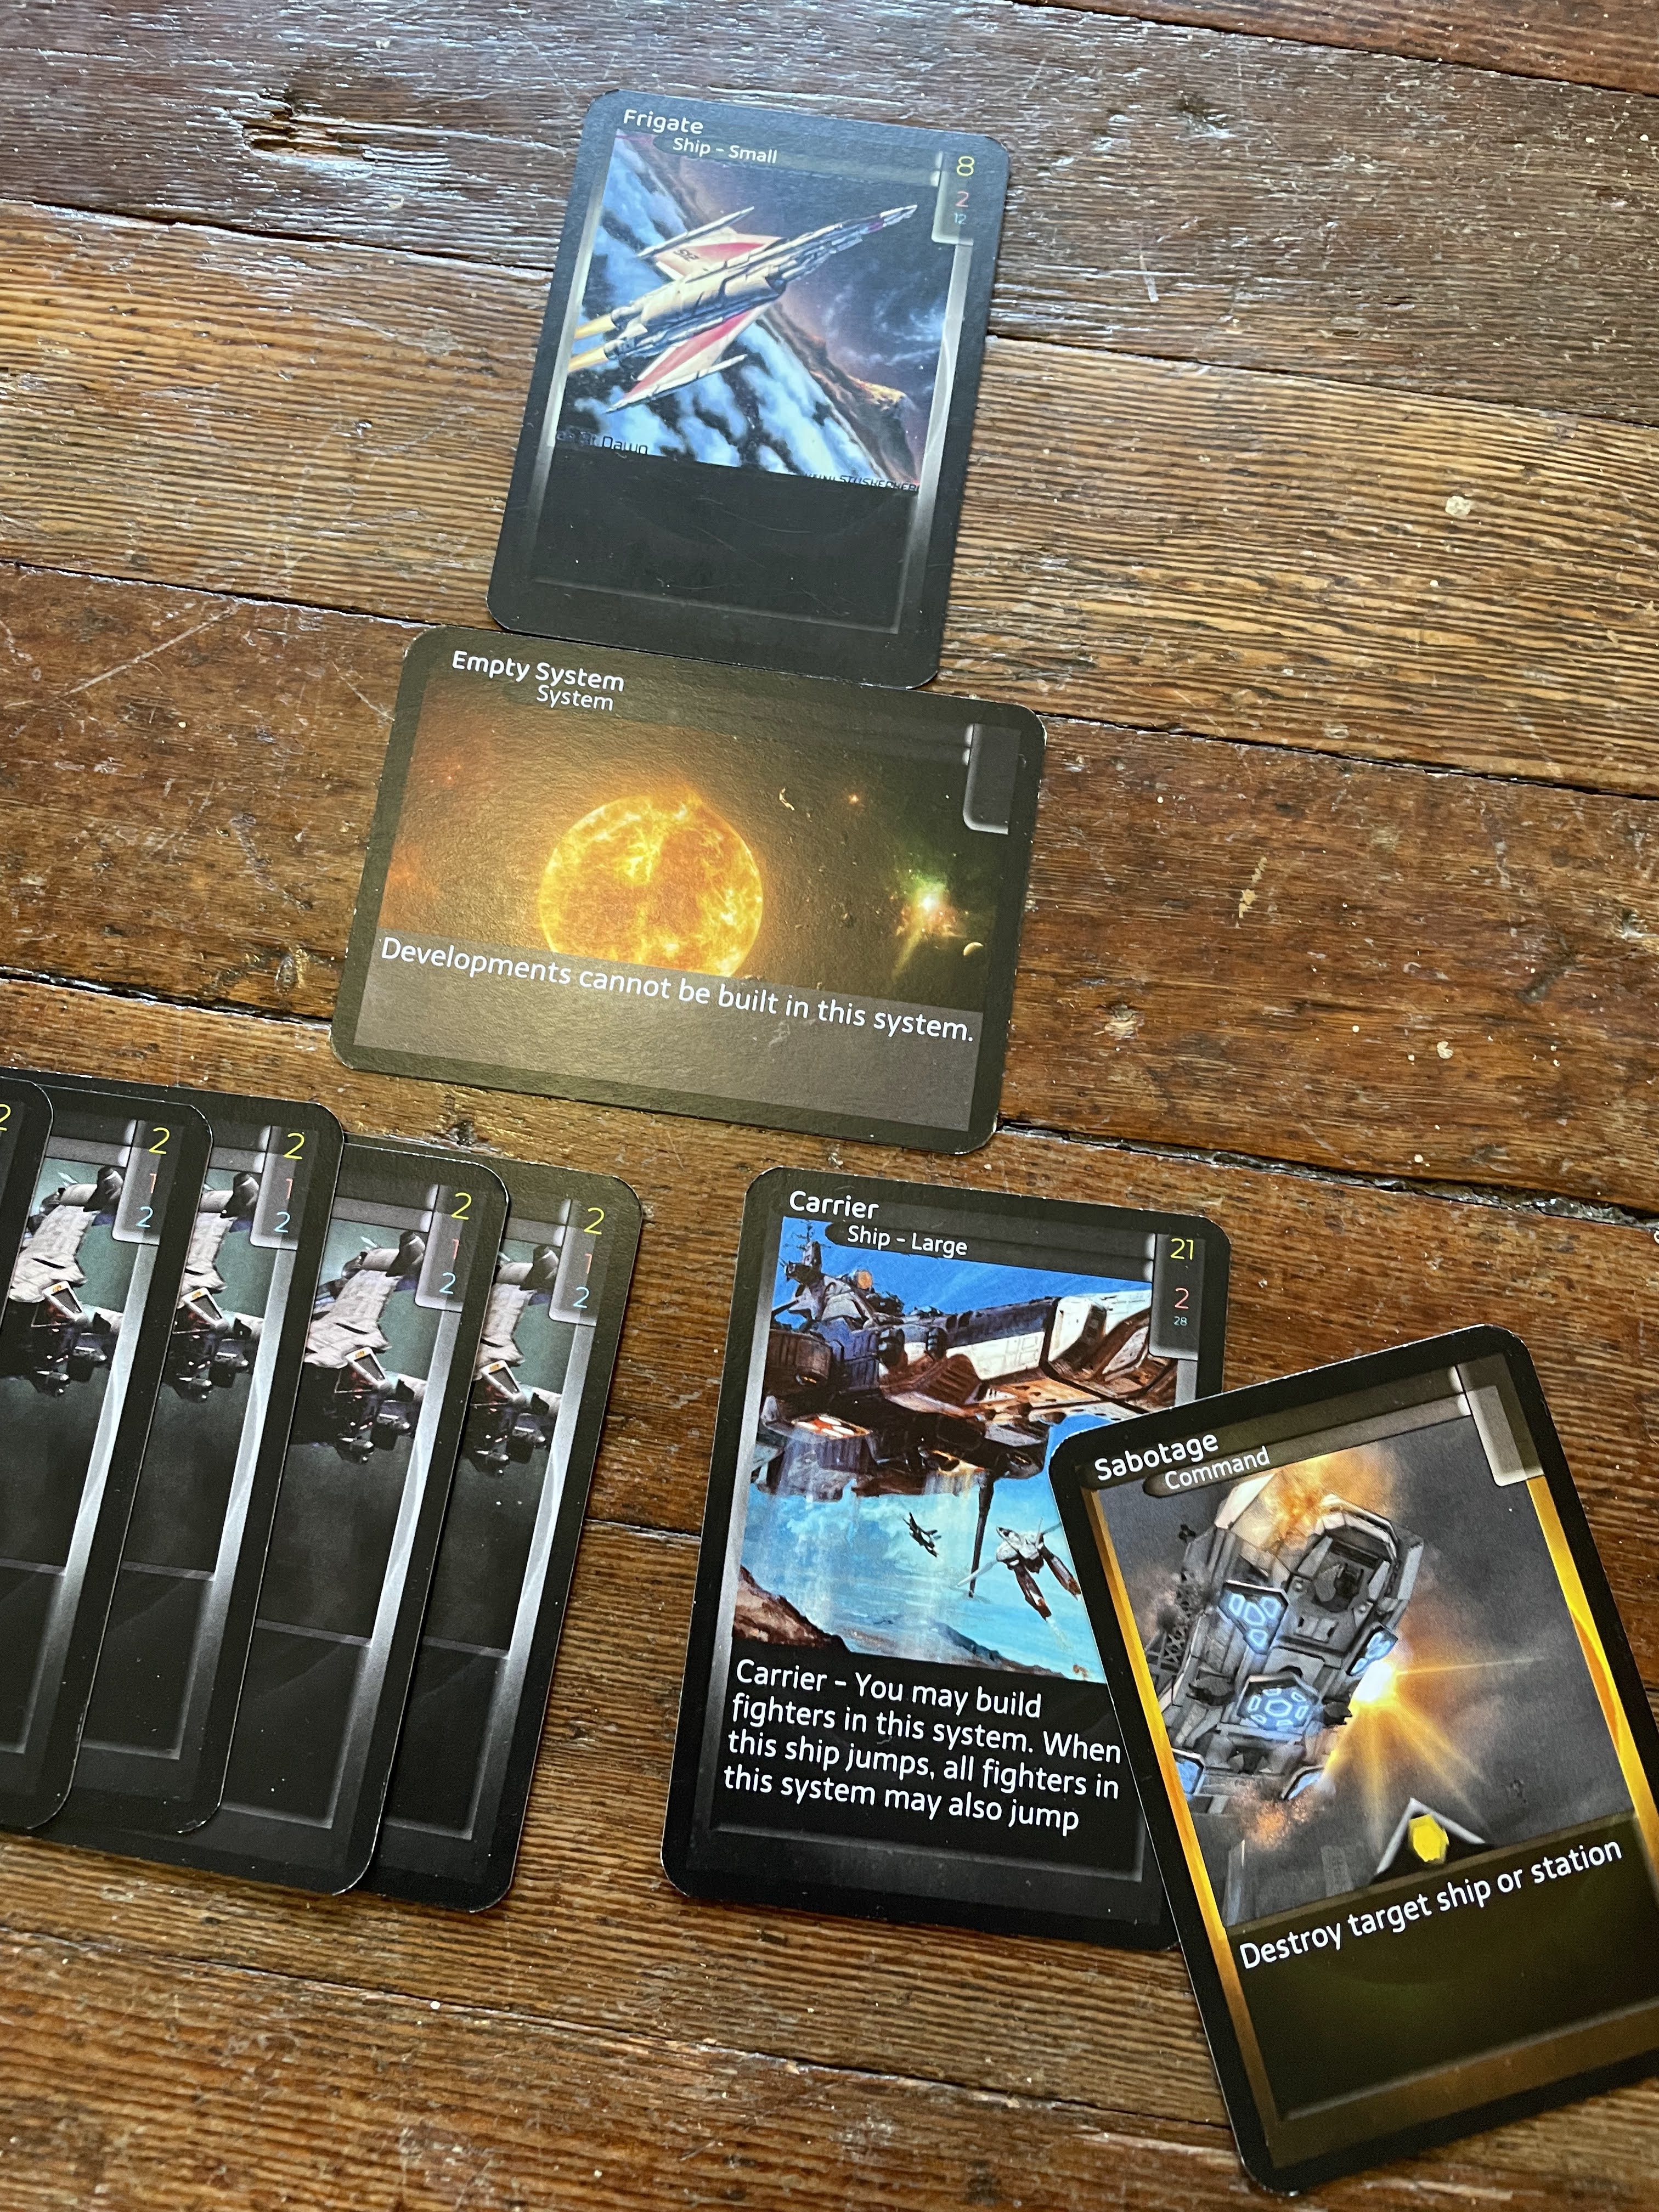 Sabotage, a Politics card, is placed on top of the Carrier to show which card it is affecting.